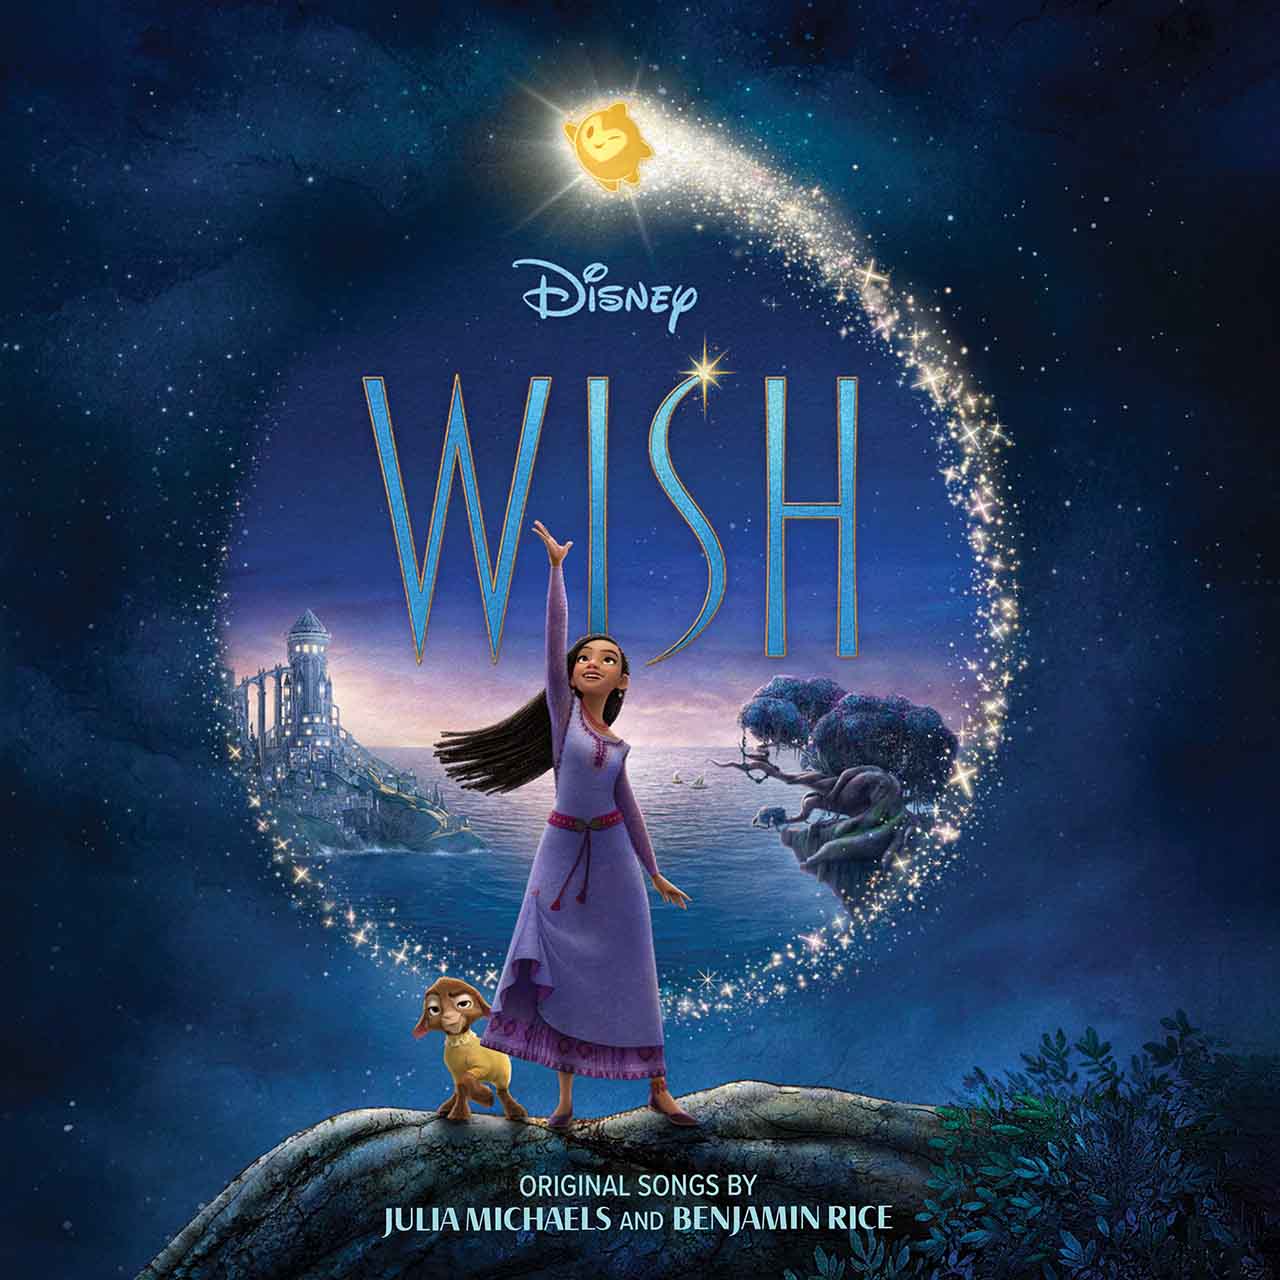 ‘This Wish’: A New Kind Of Classic Disney Song